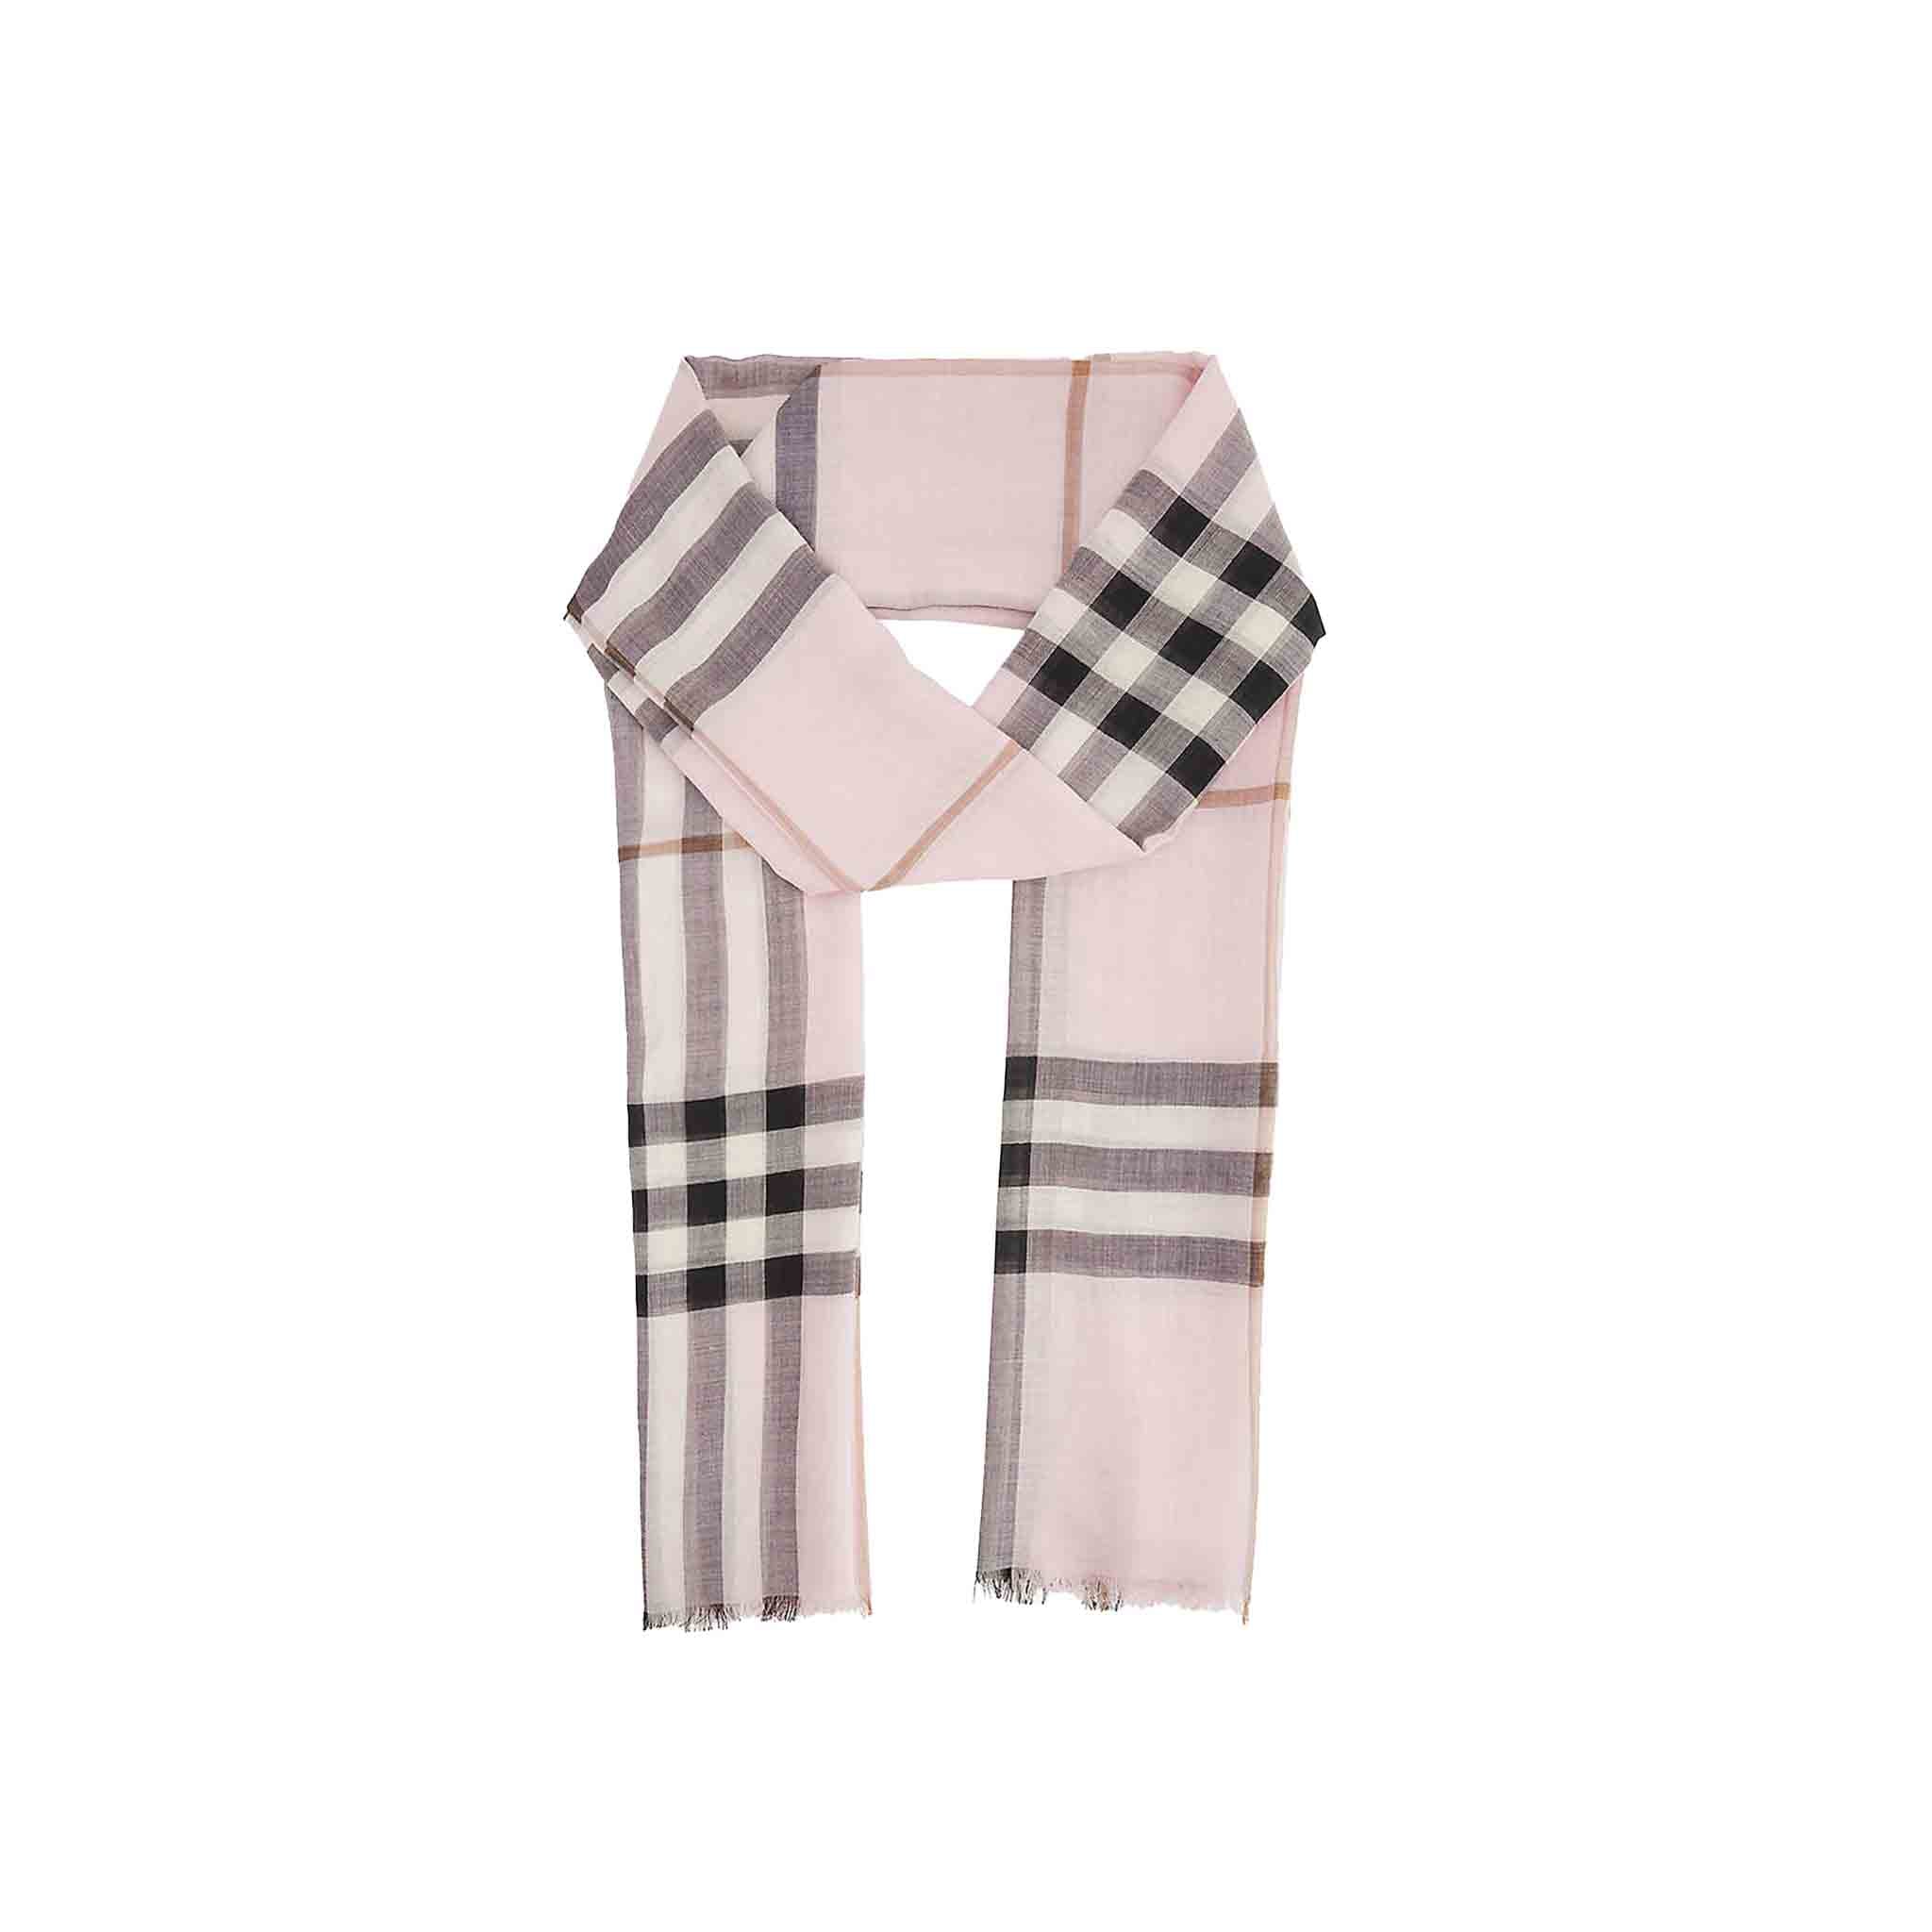 Burberry Check Lightweight Wool Silk Scarf in Pale Candy Pink